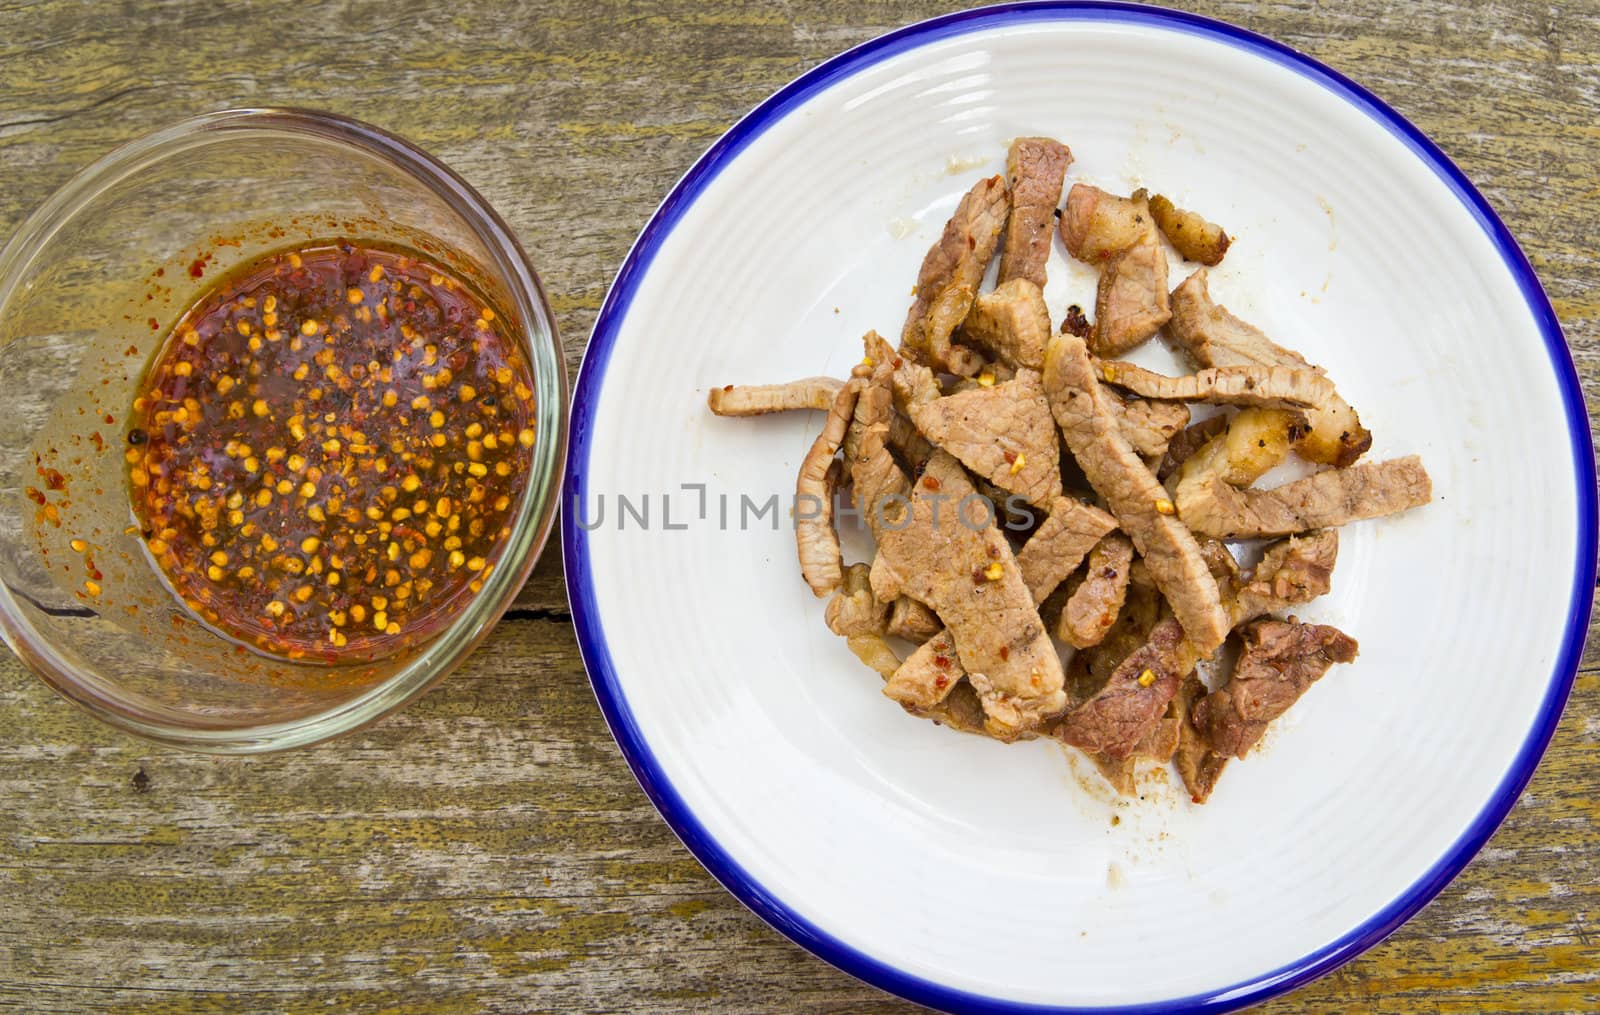 fired meat with chili sauce by tungphoto